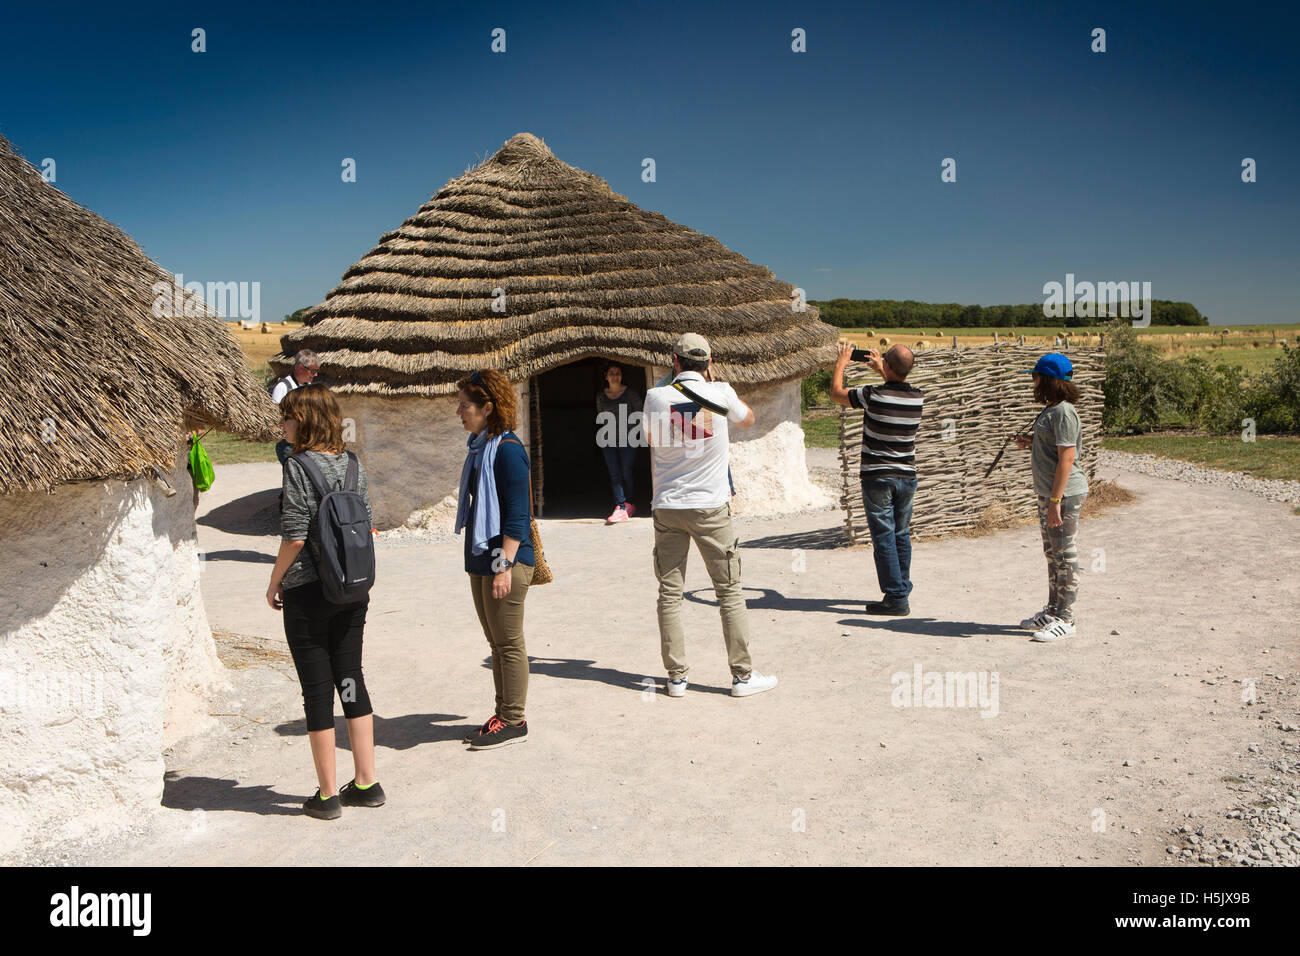 UK, England, Wiltshire, Stonehenge Visitor Centre visitors in reconstructed Neolithic village Stock Photo